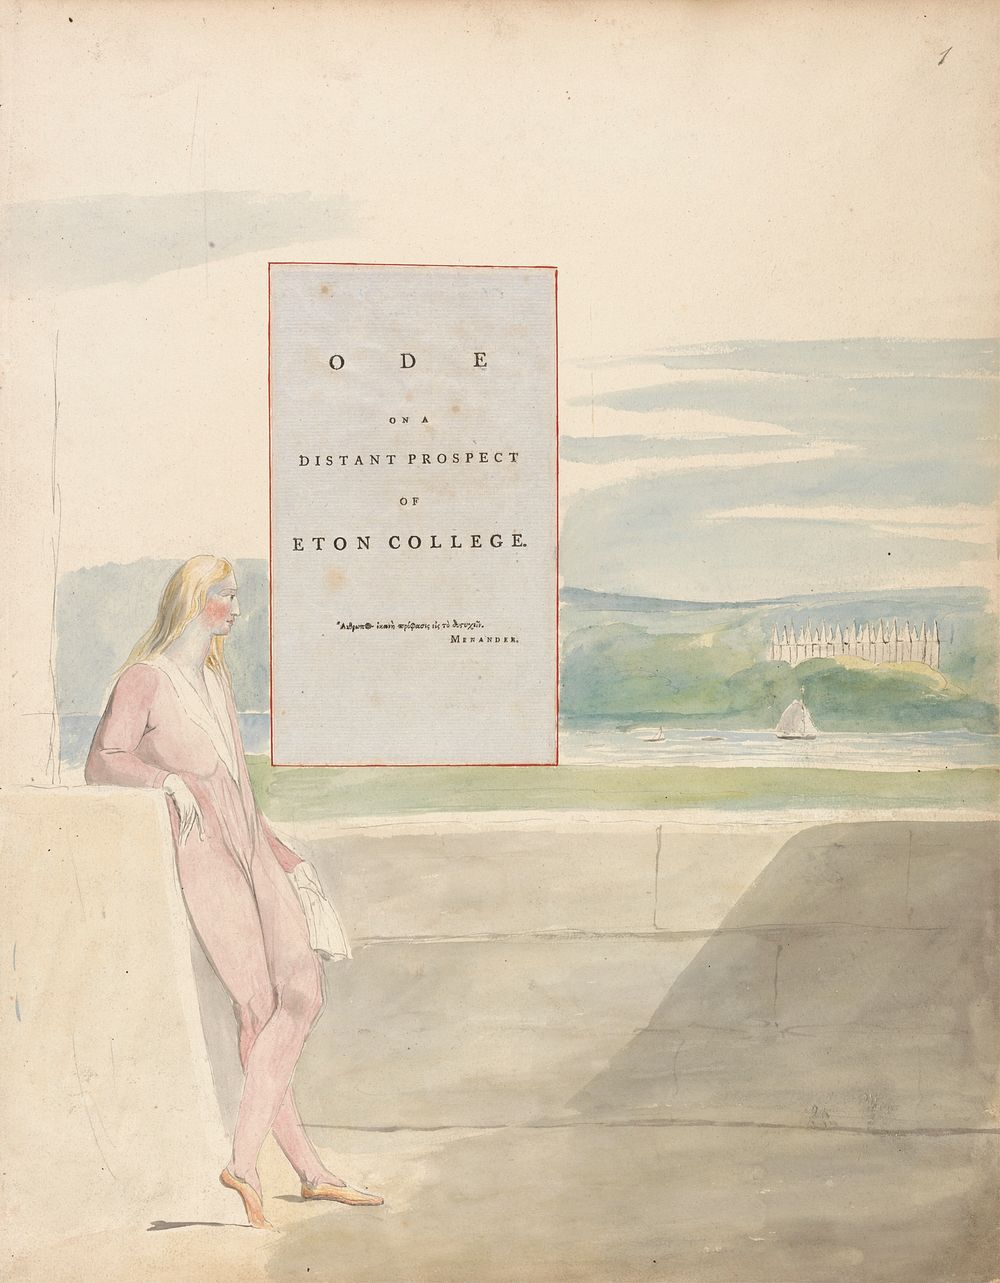 The Poems of Thomas Gray, Design 13, "Ode on a Distant Prospect of Eton College." by William Blake. Original from Yale…